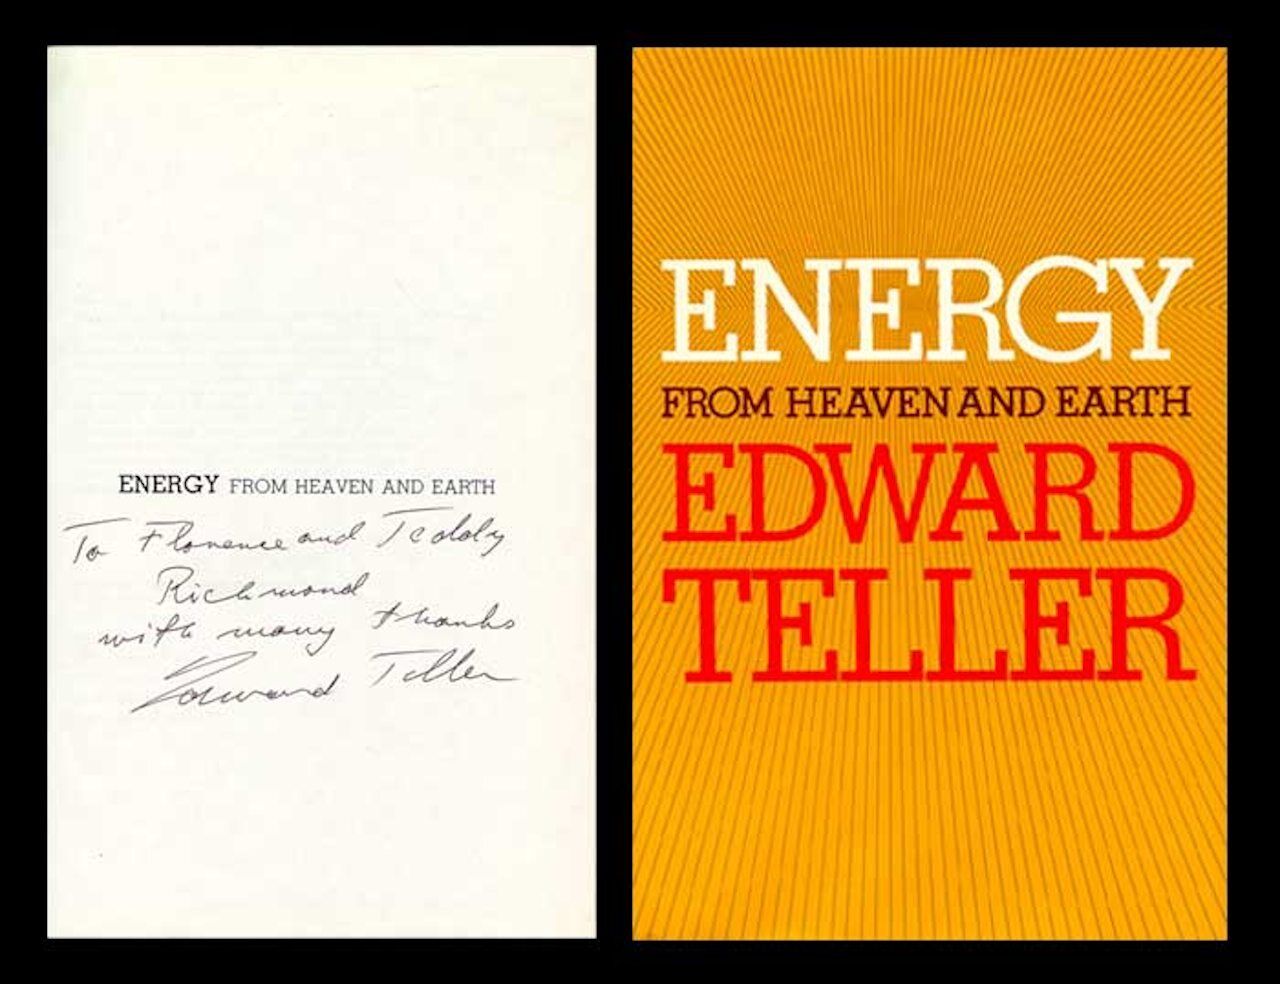 EDWARD TELLER Autographed Signed Book Atomic Hydrogen Bomb Livermore Stanford